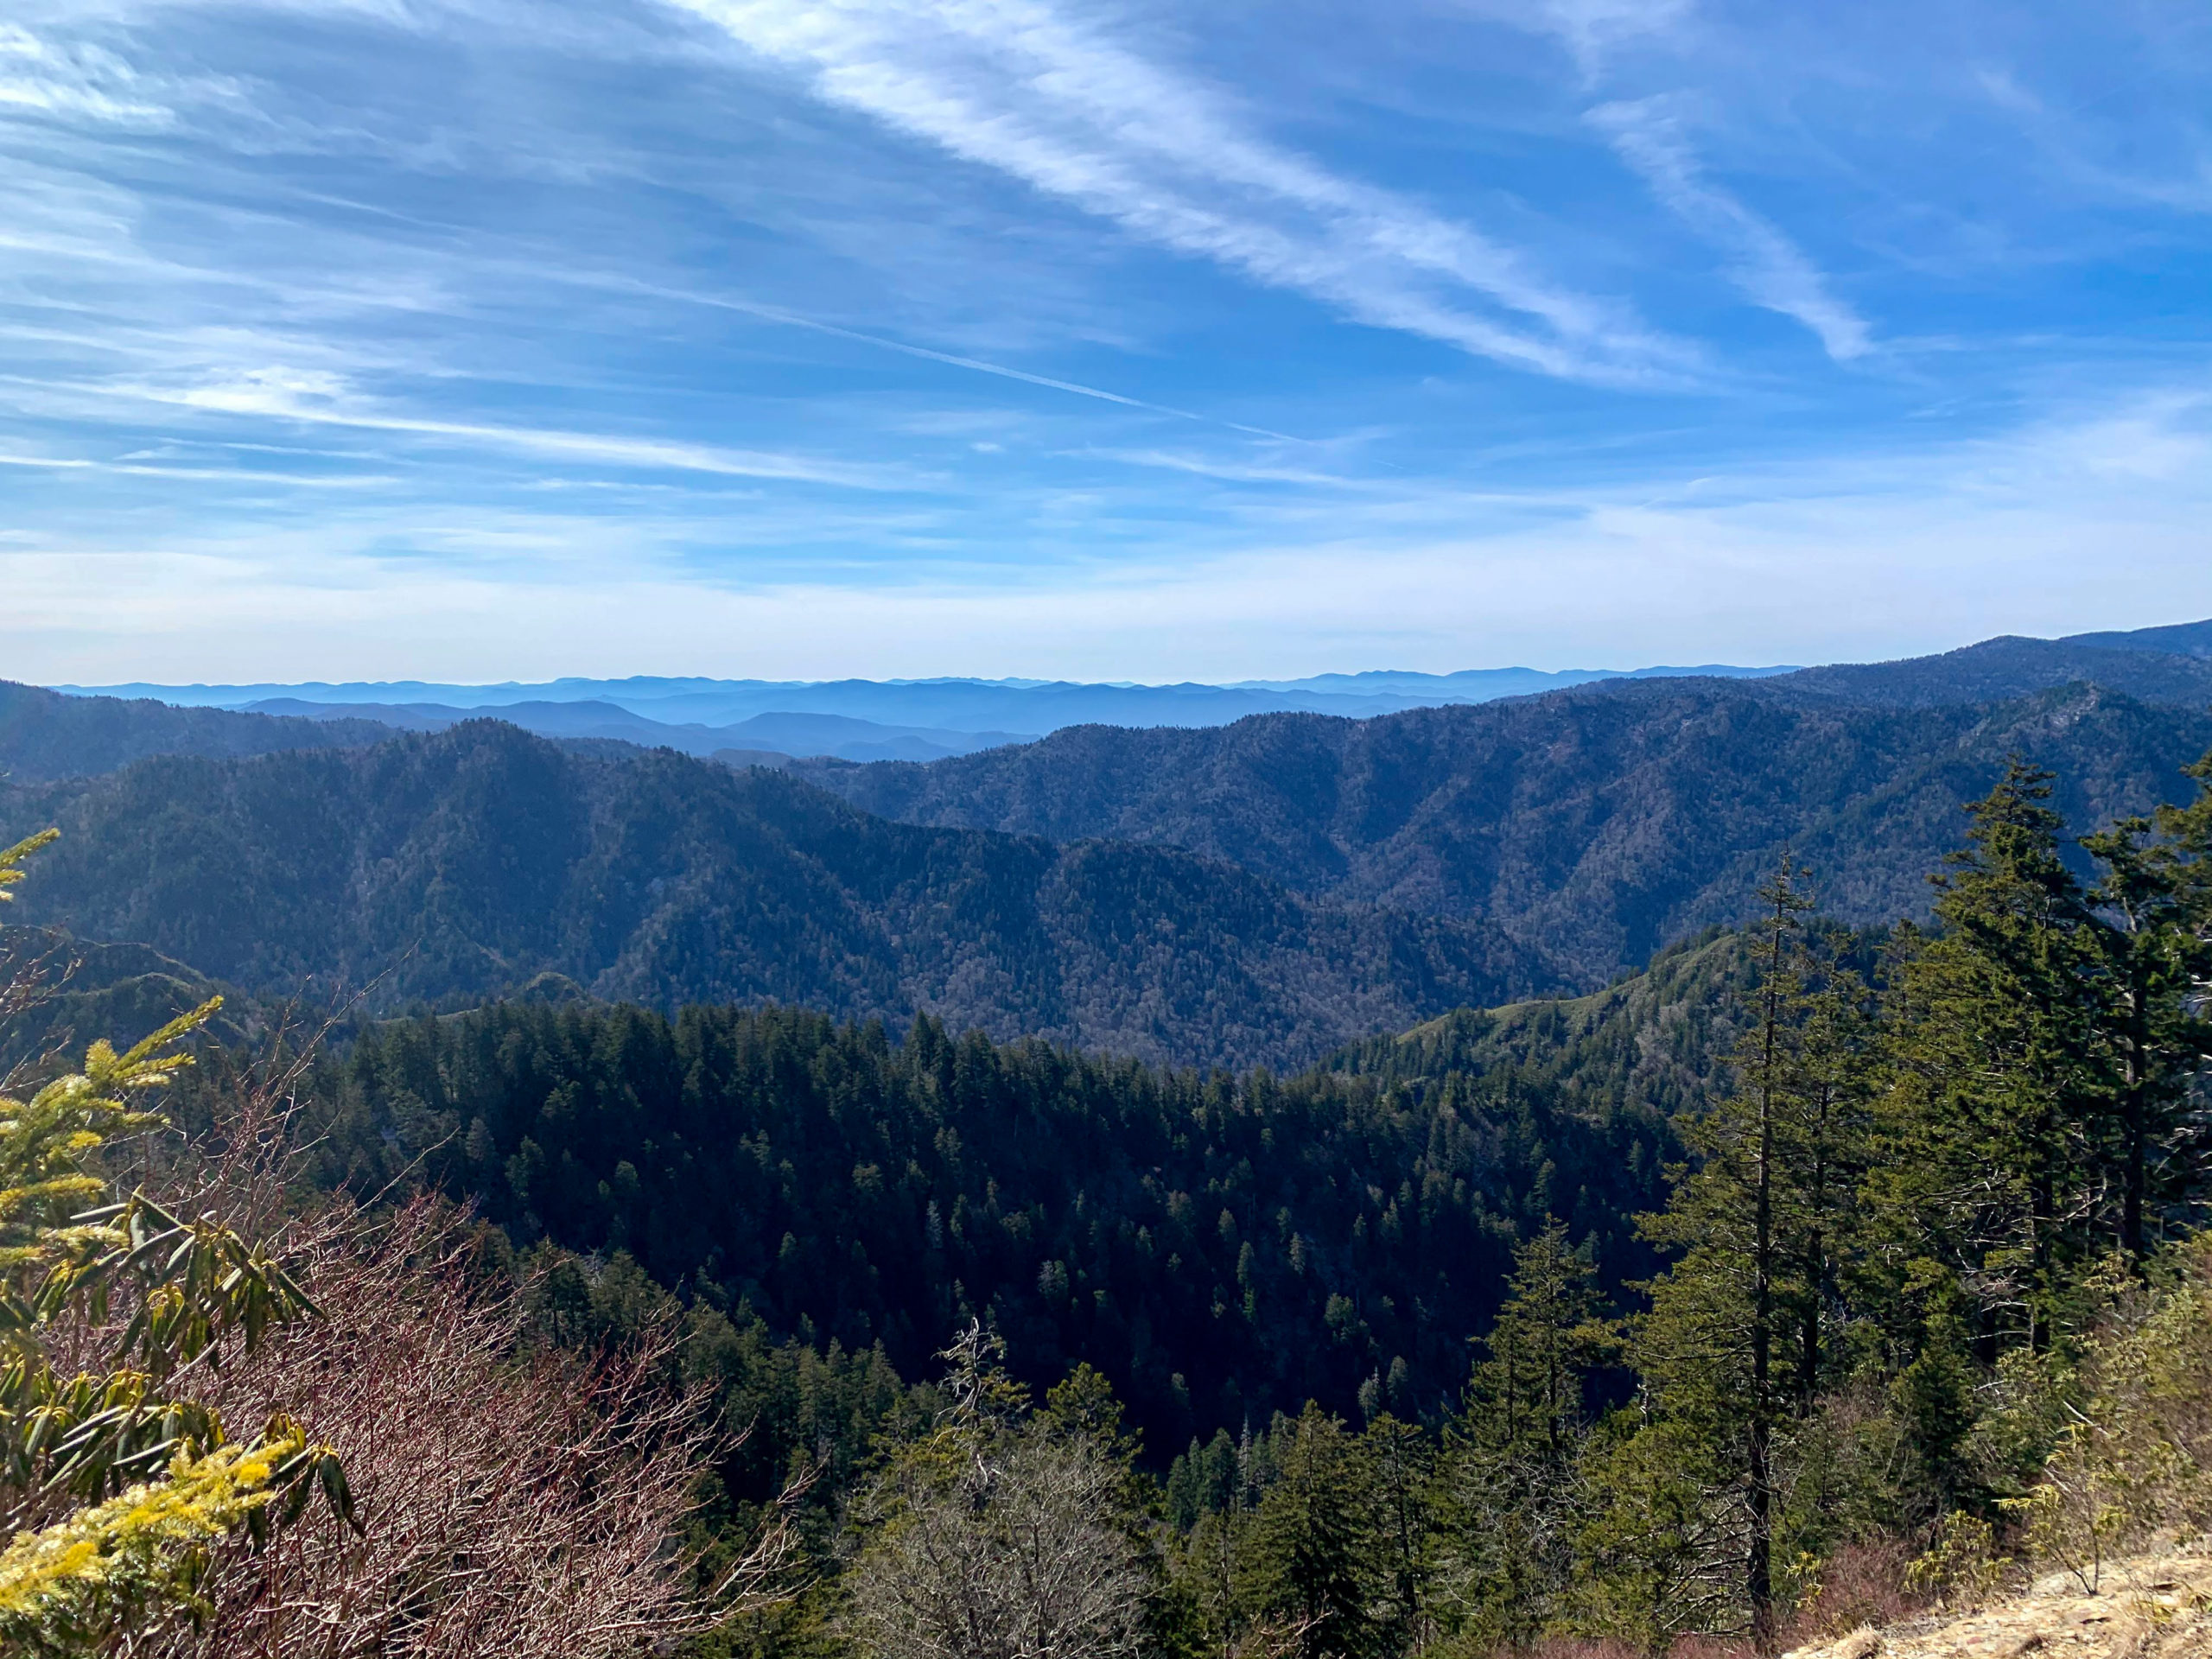 Views from Clingmans Dome road 